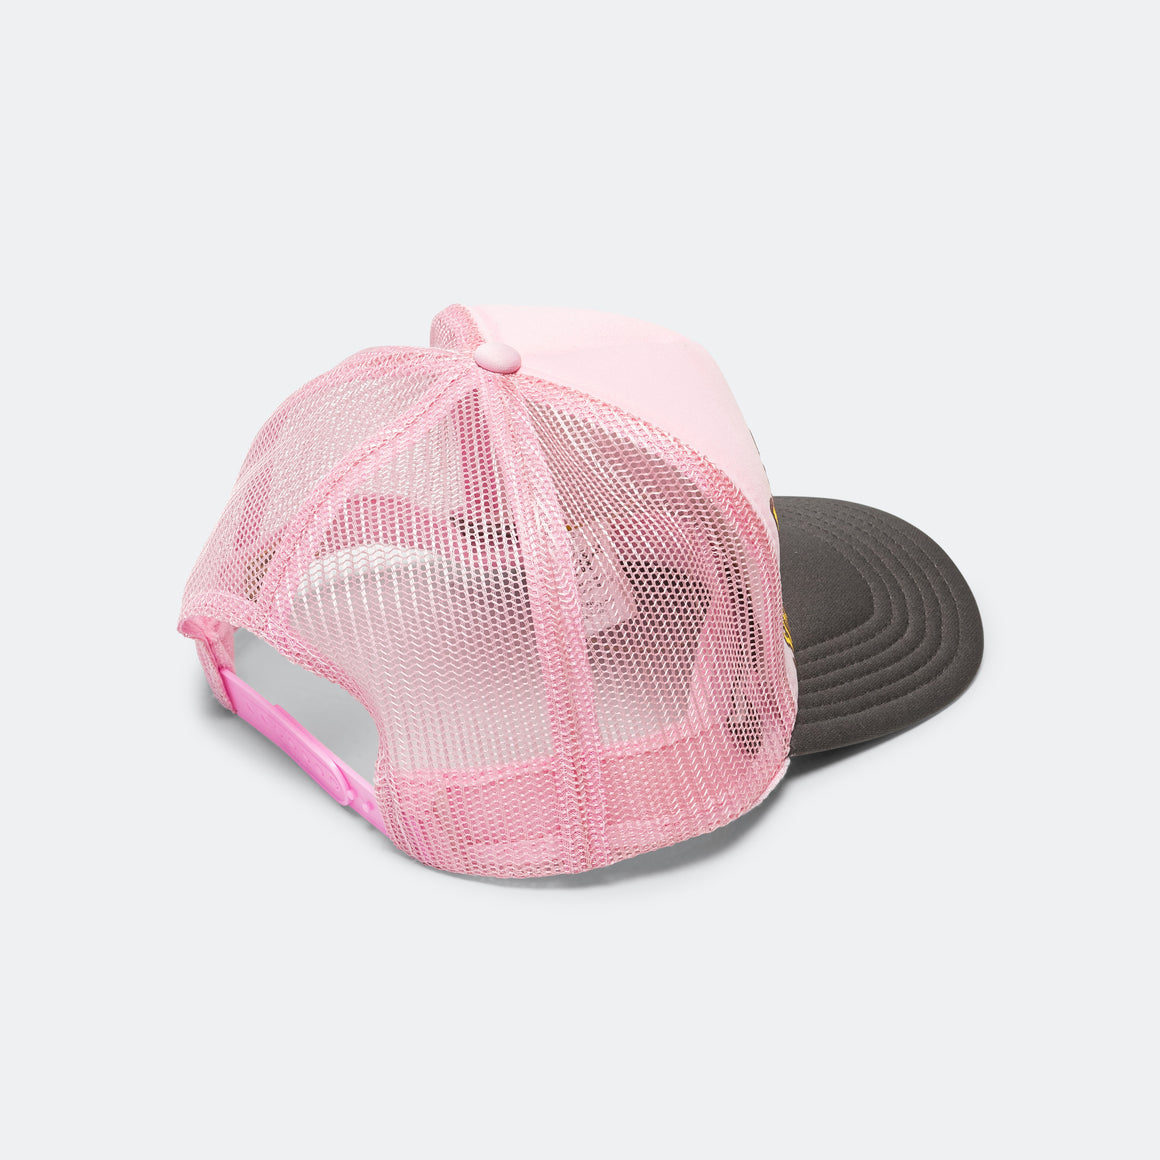 CONEYCOWBOWY Trucker CAP - Pink x Charcoal